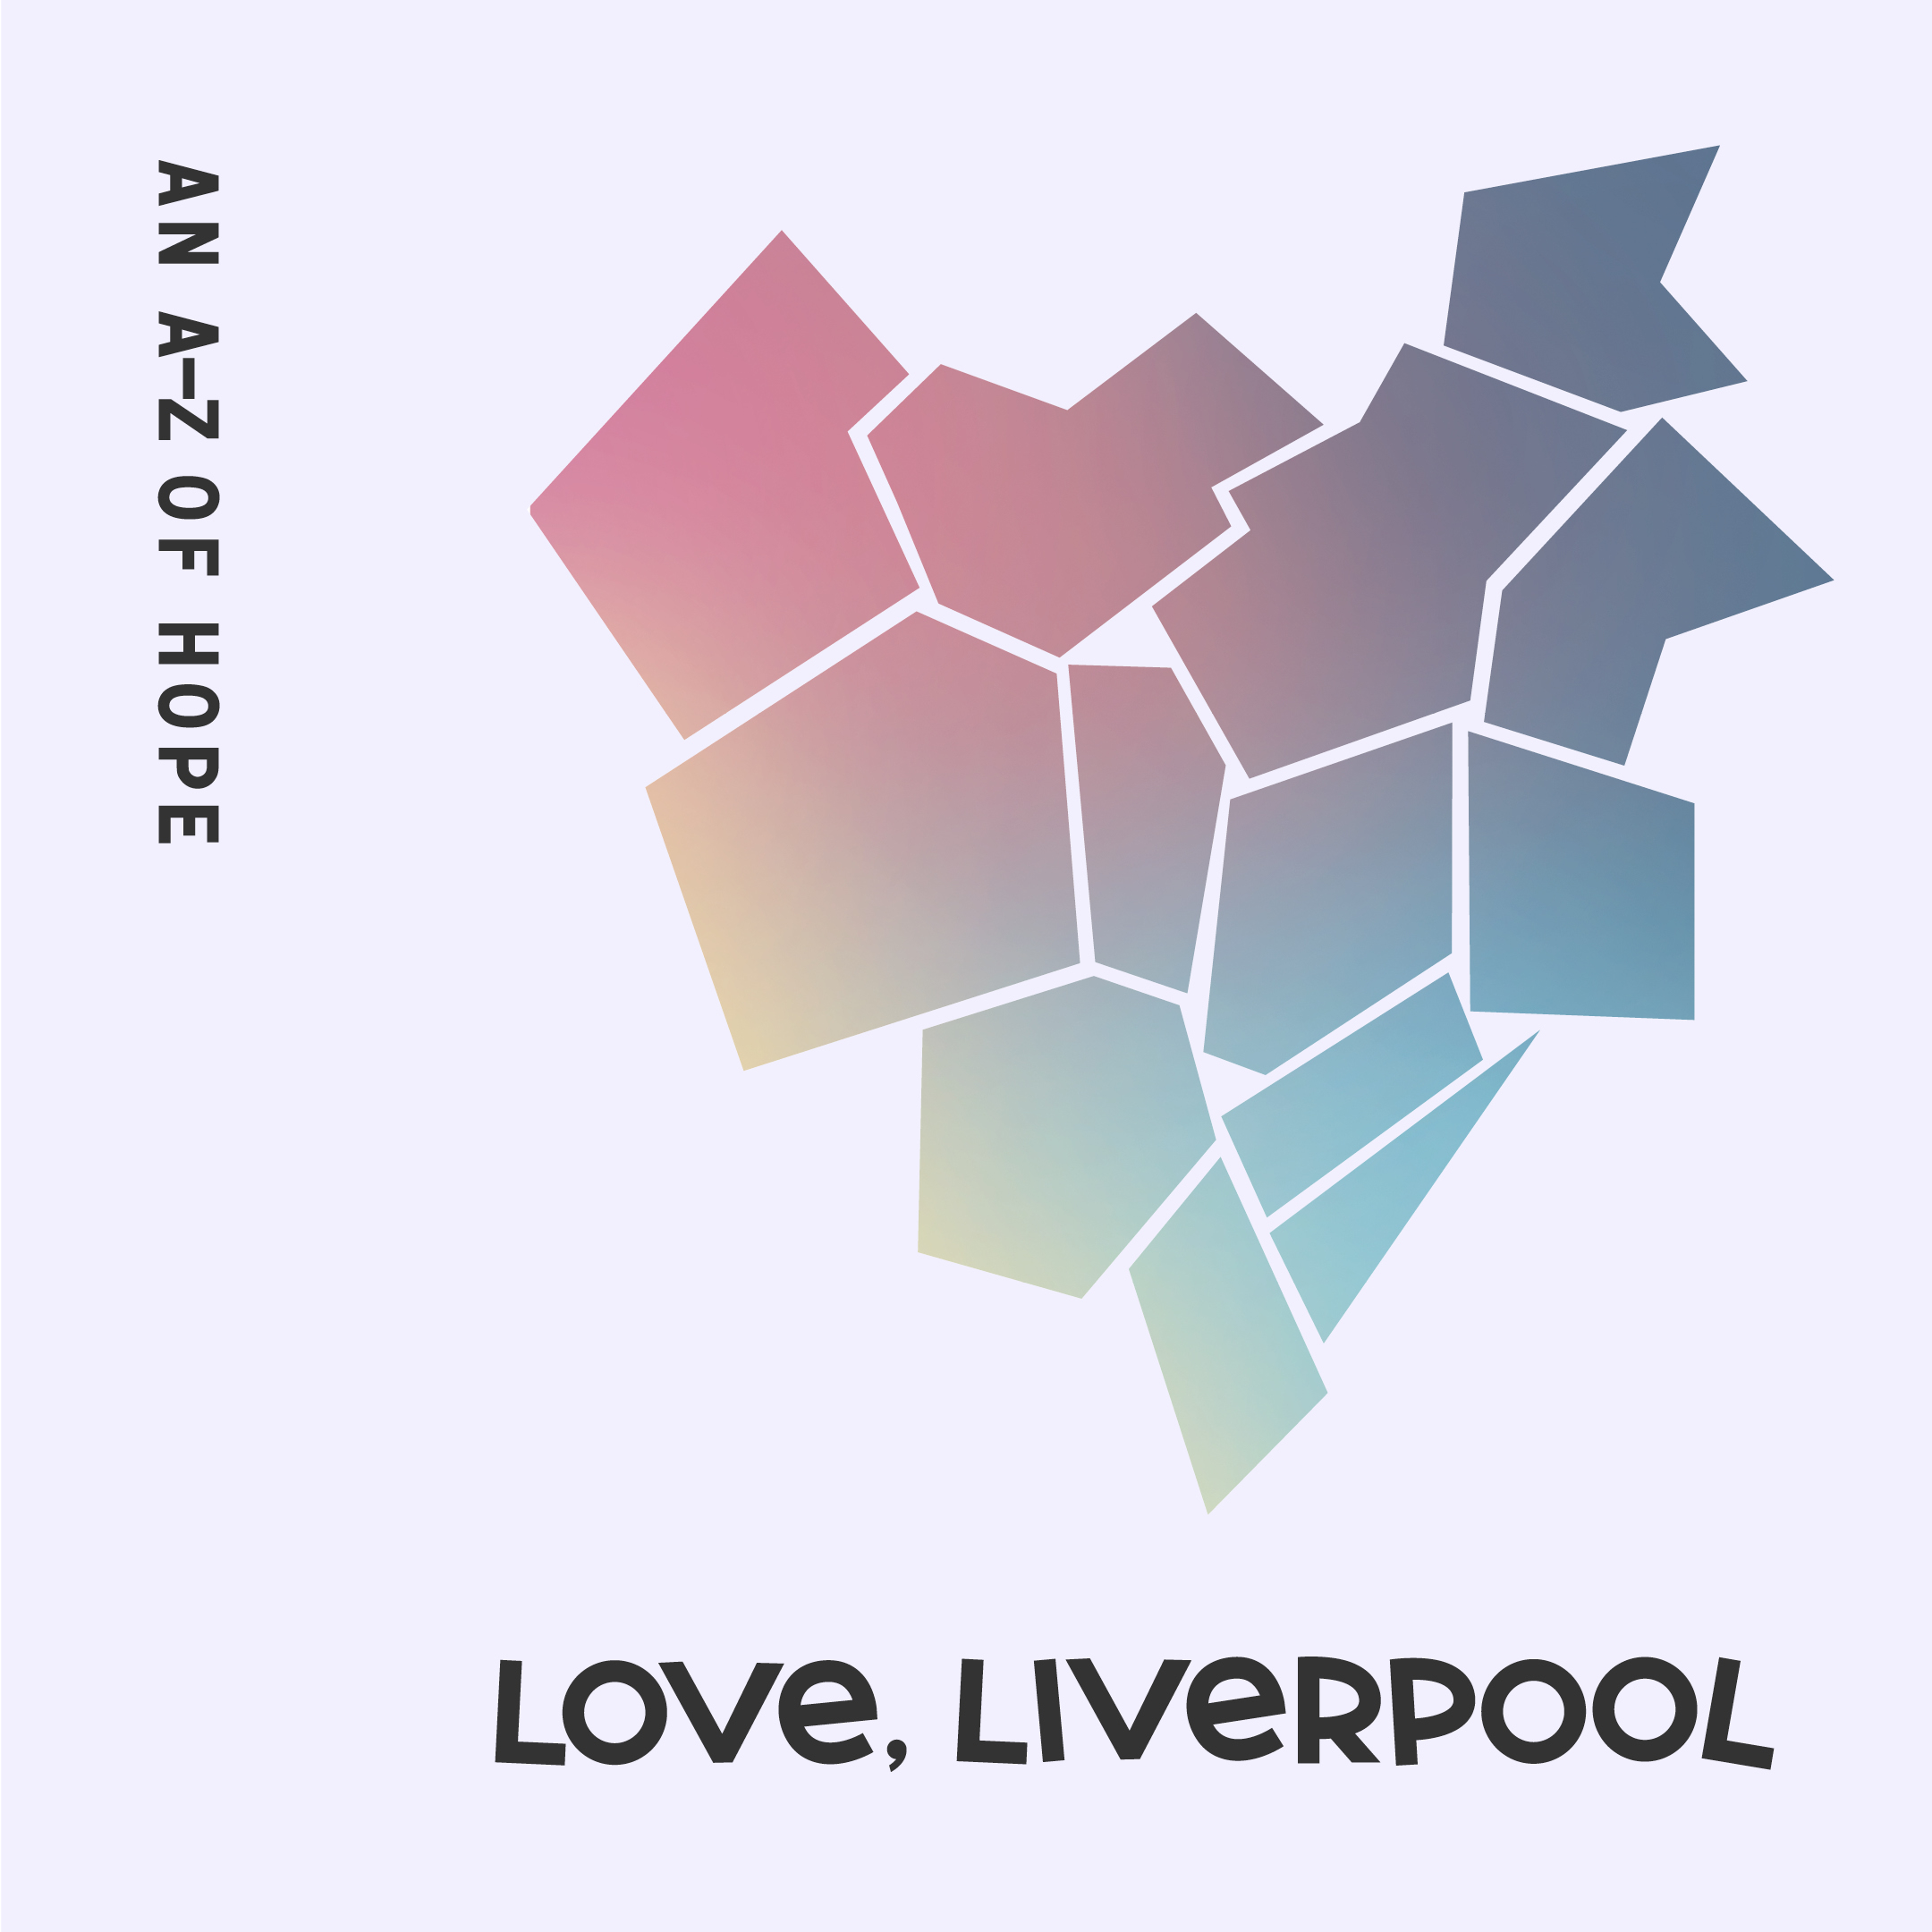 Mock up of the Love, Liverpool artwork.